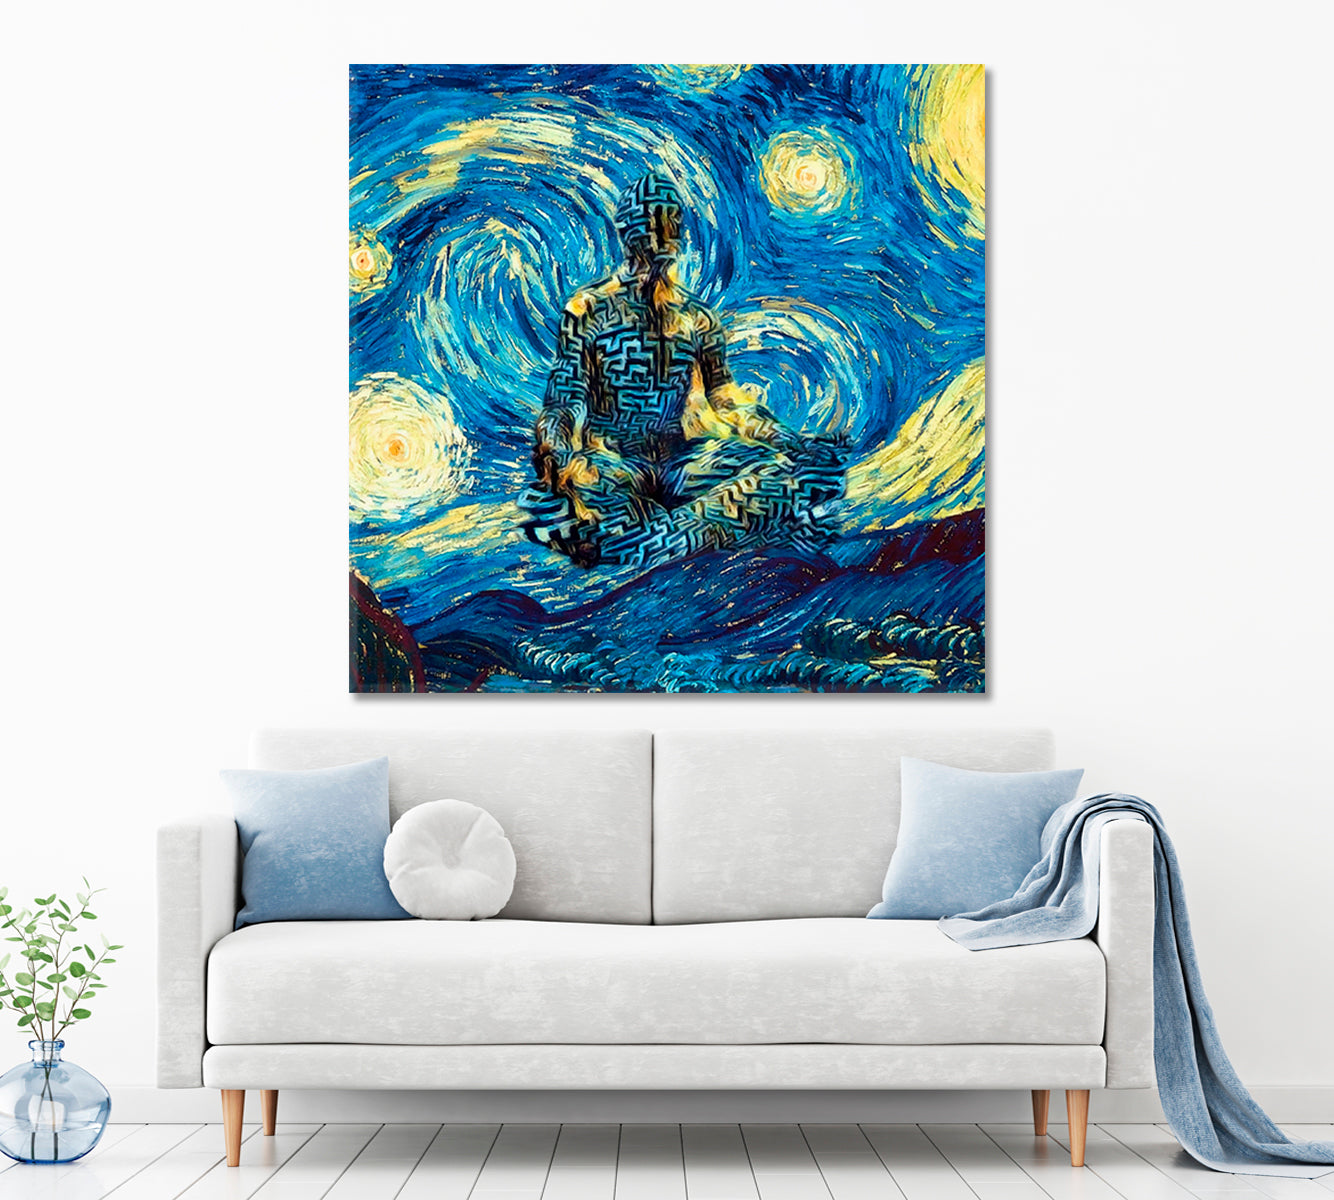 INSPIRED BY VAN GOGH Man In Lotus Pose Surreal Fantasy Large Art Print Décor Artesty 1 Panel 12"x12" 